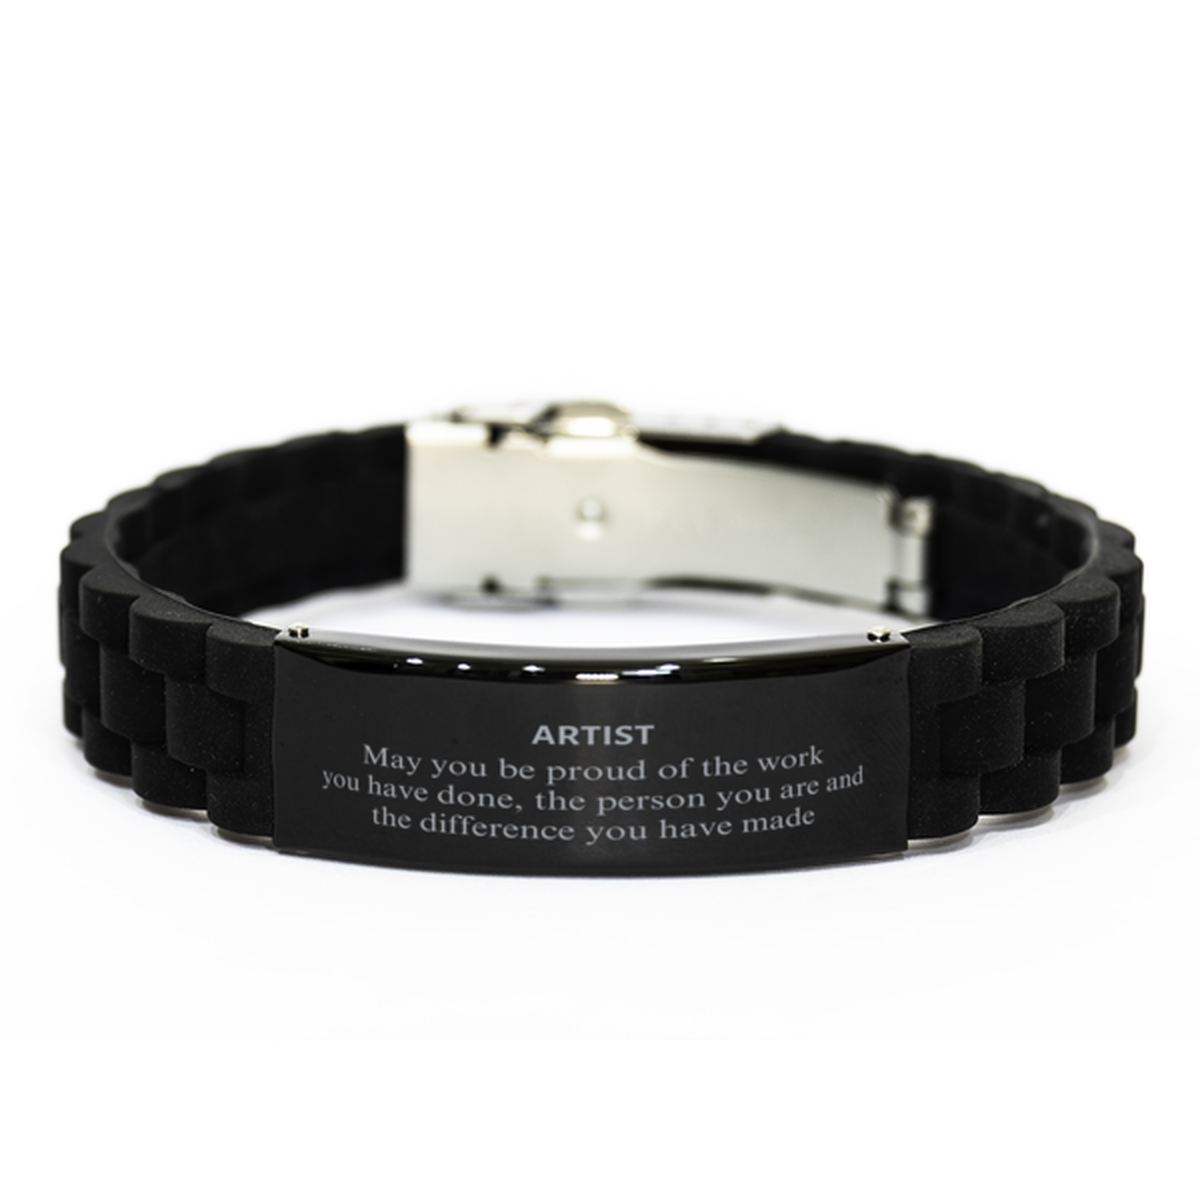 Artist May you be proud of the work you have done, Retirement Artist Black Glidelock Clasp Bracelet for Colleague Appreciation Gifts Amazing for Artist